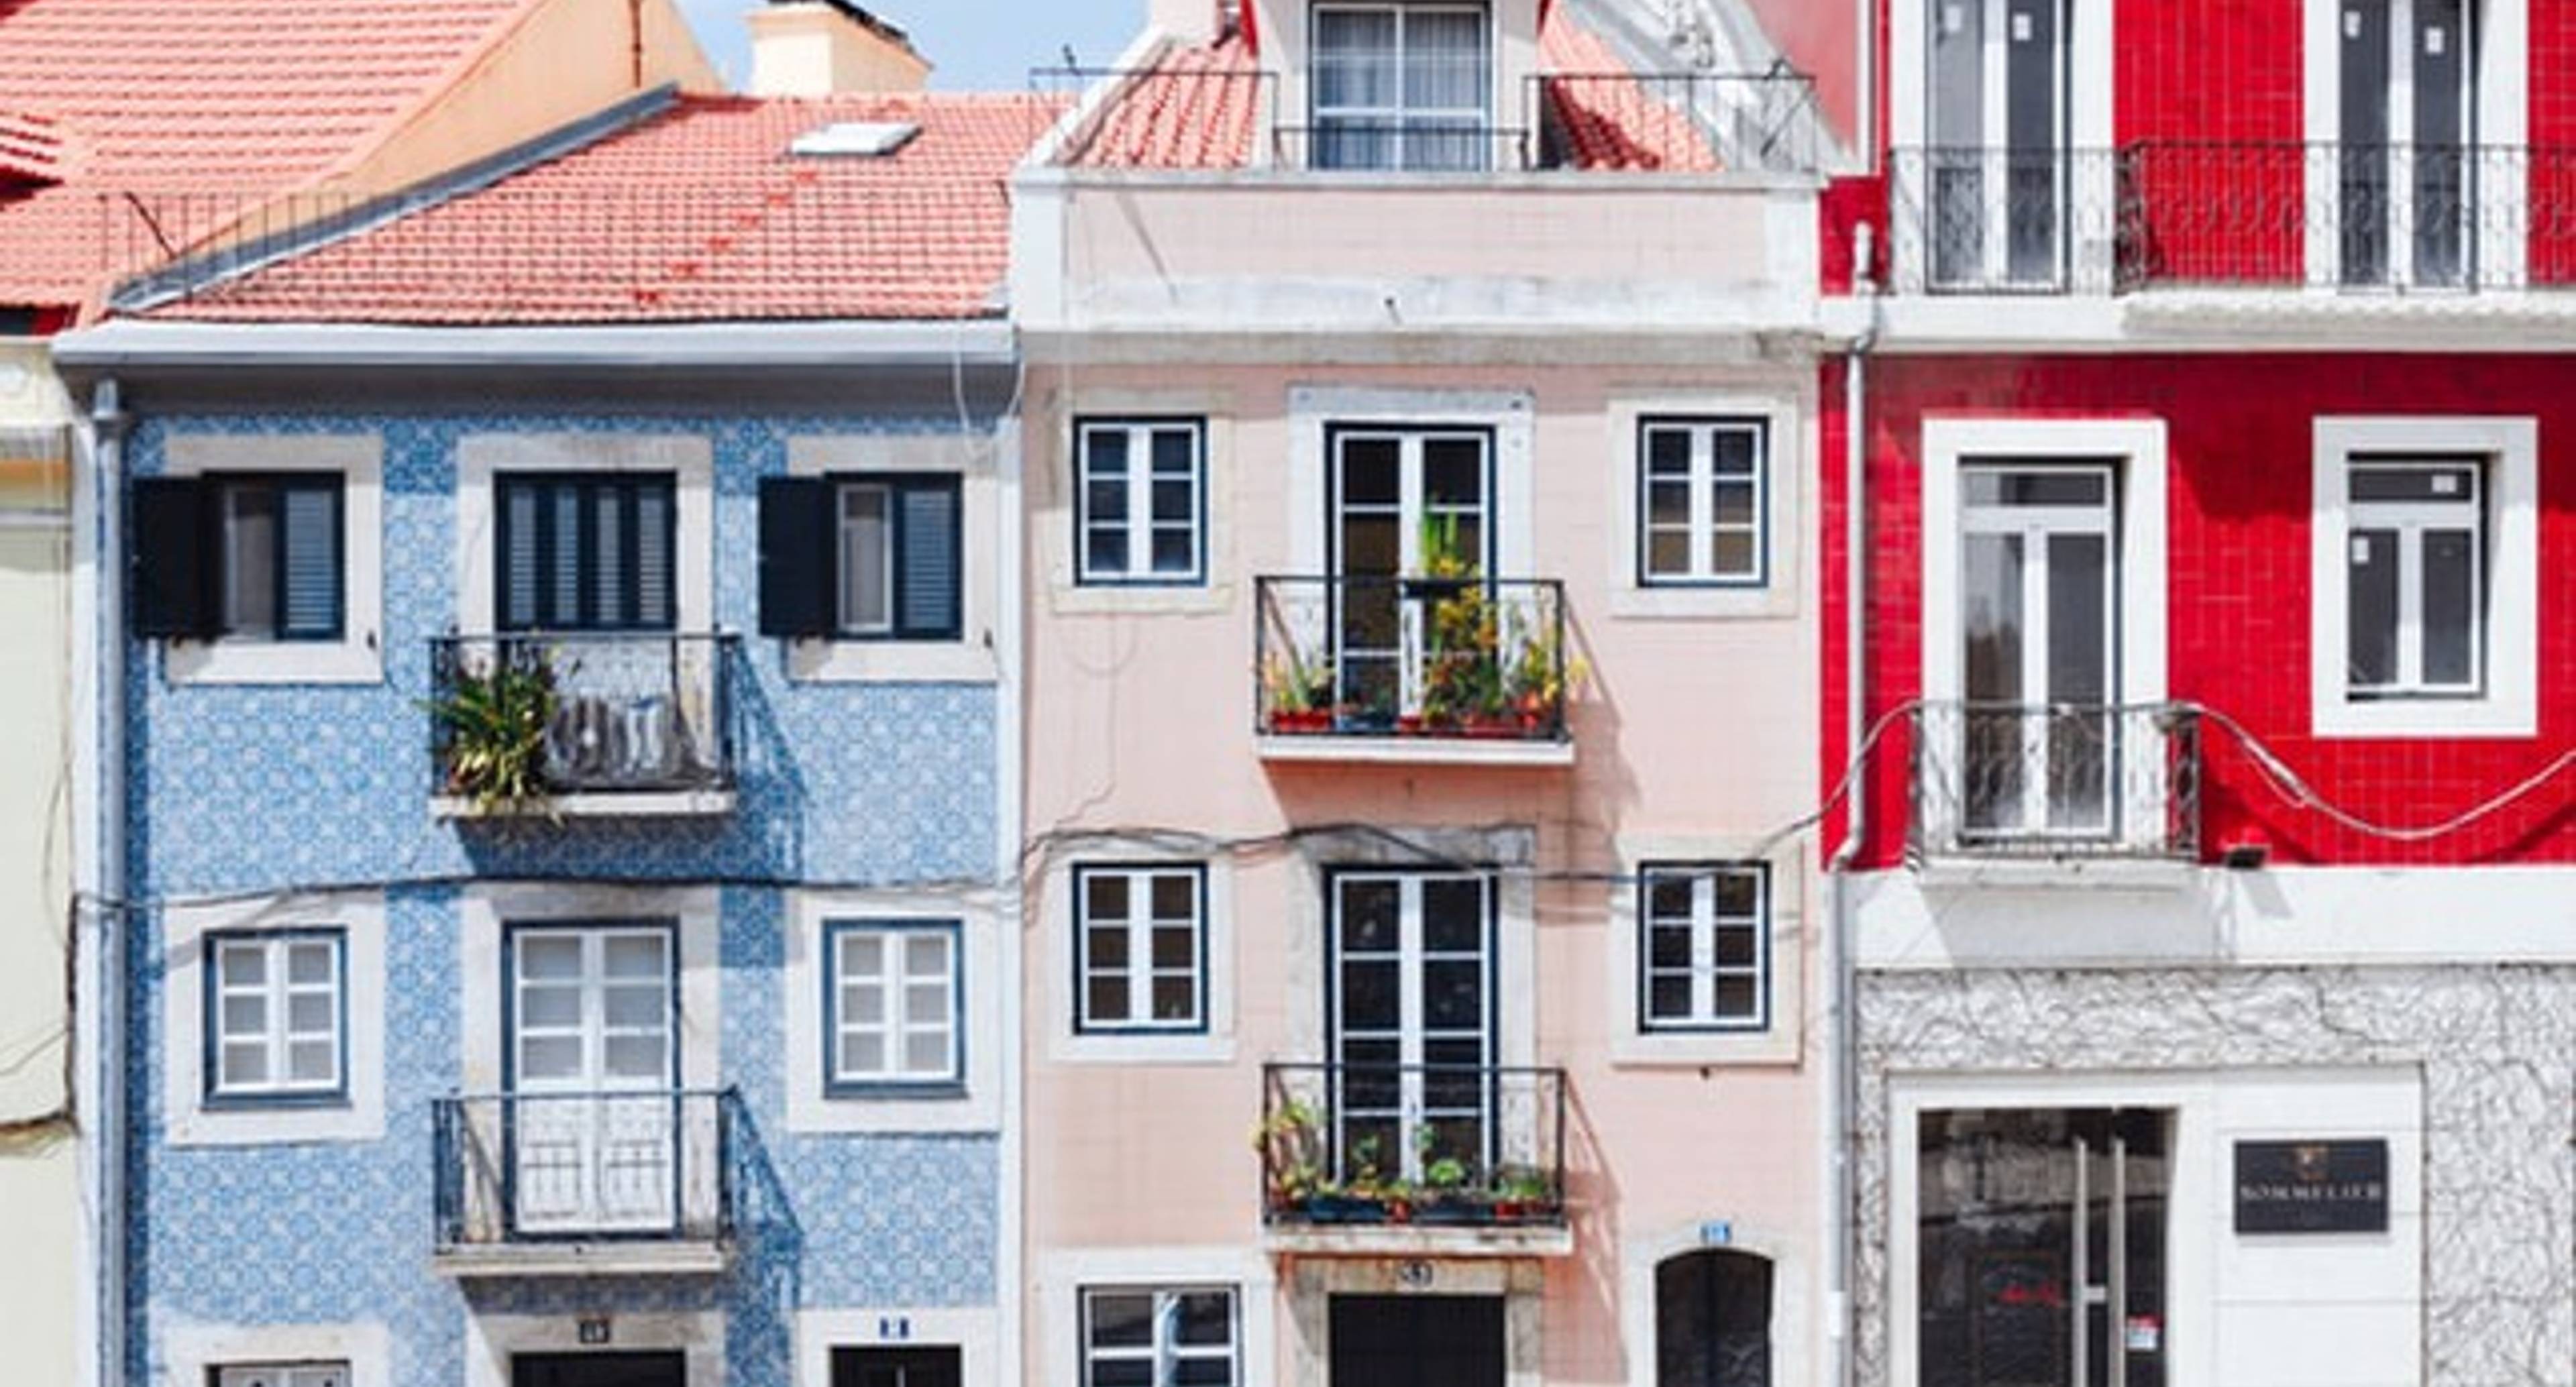 The charm of Lisbon architecture